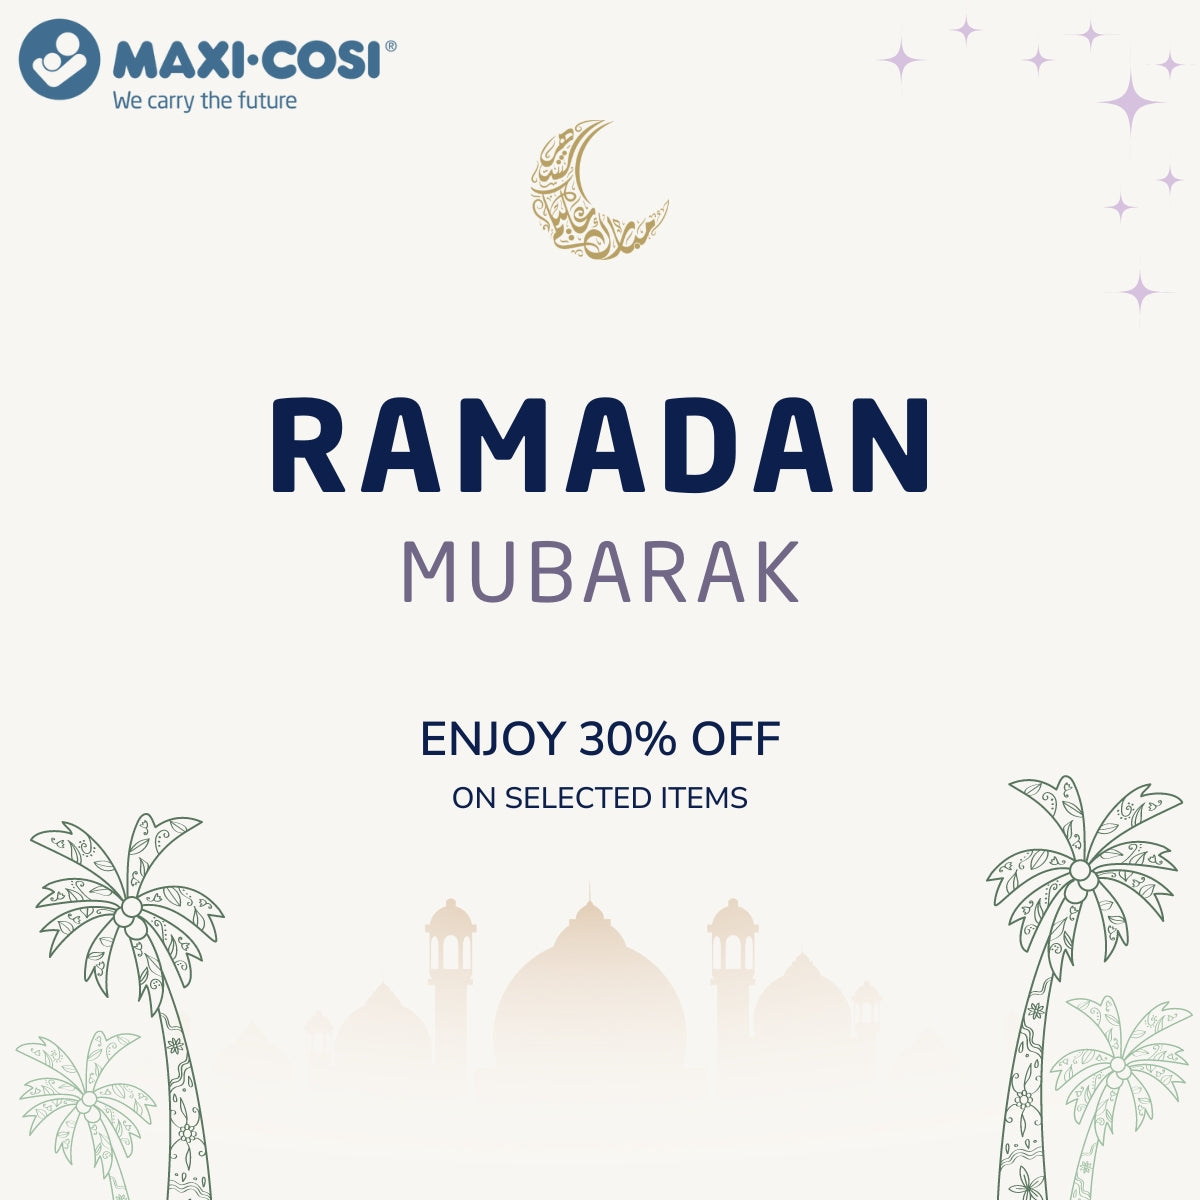 Maxi-Cosi UAE's White Mobile Banner for Ramadan Offers